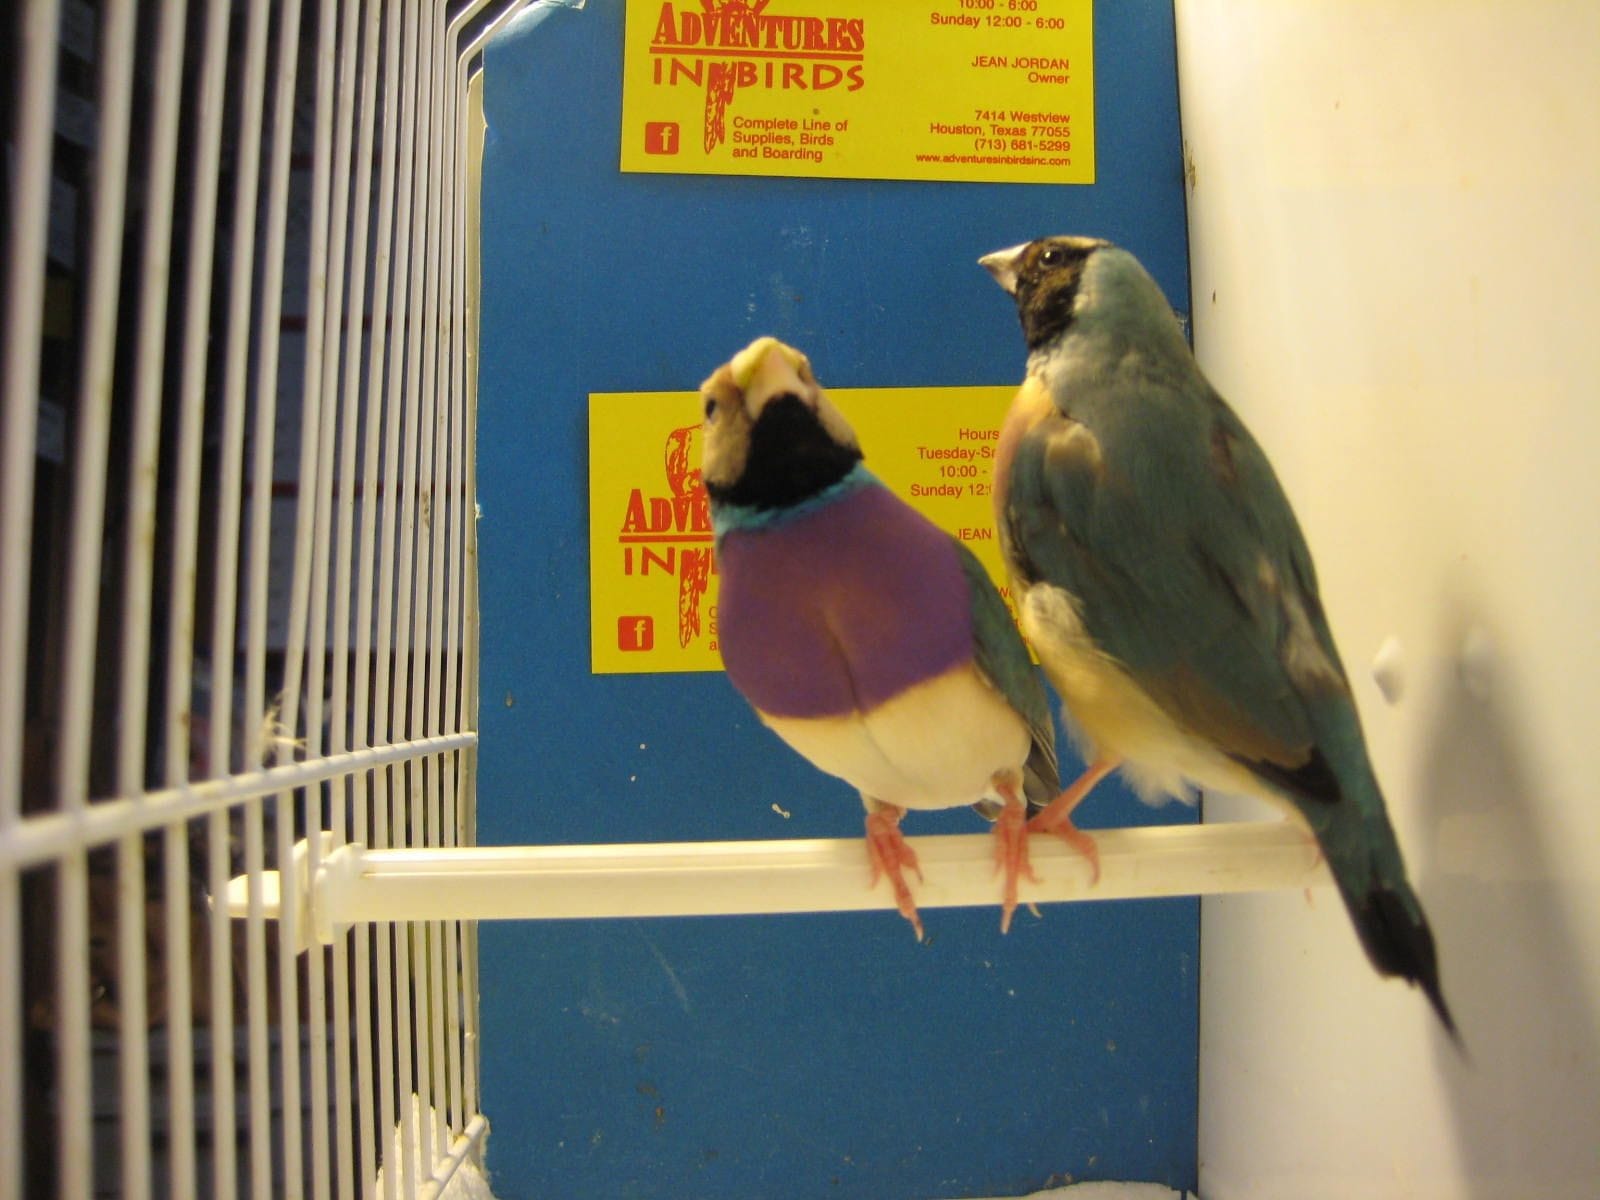 Lady Gouldian Finches for Sale in Houston at Adventures in Birds